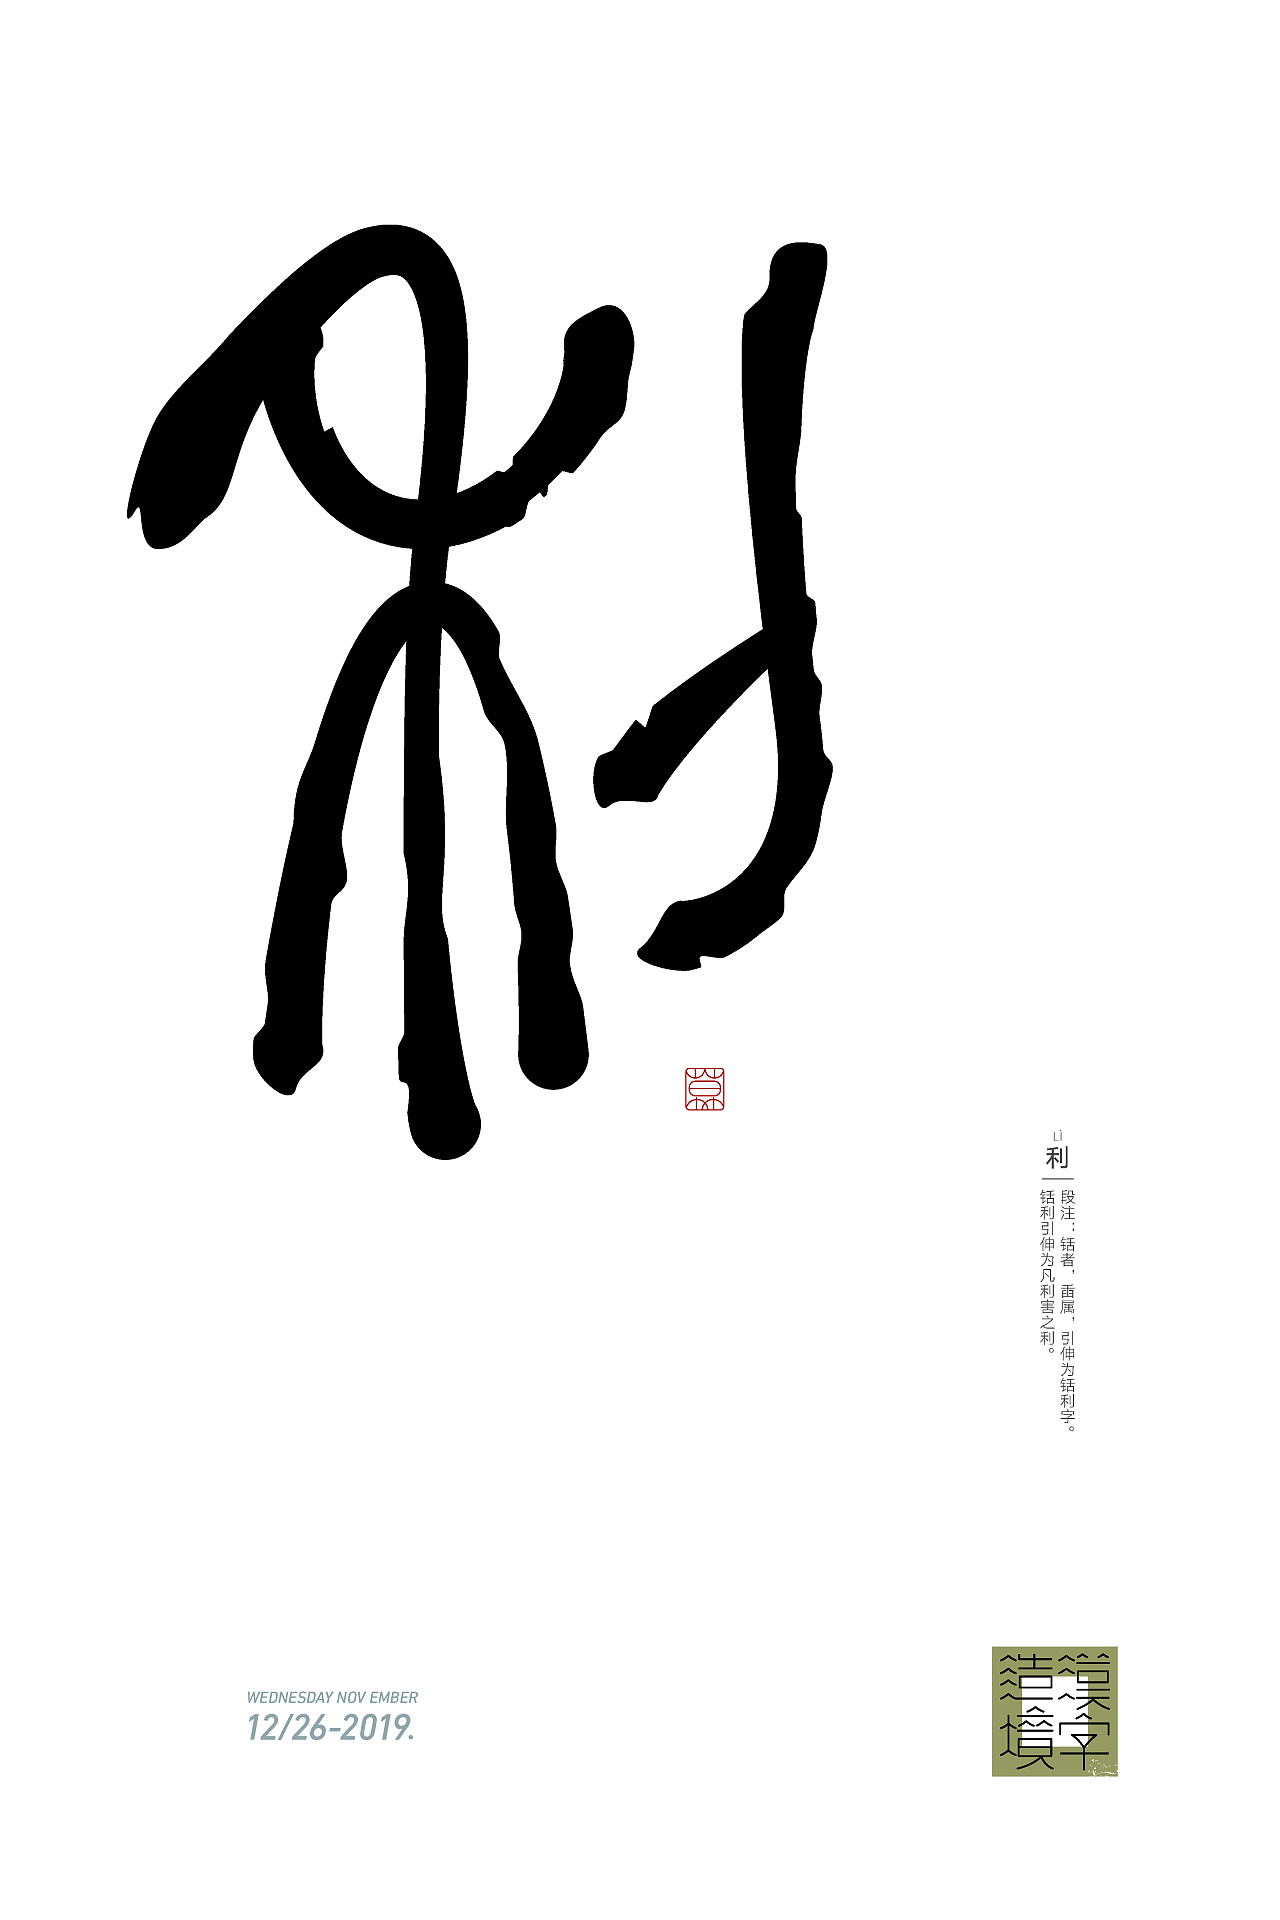 The Chinese language is extensive and profound. Can you understand what it is written?